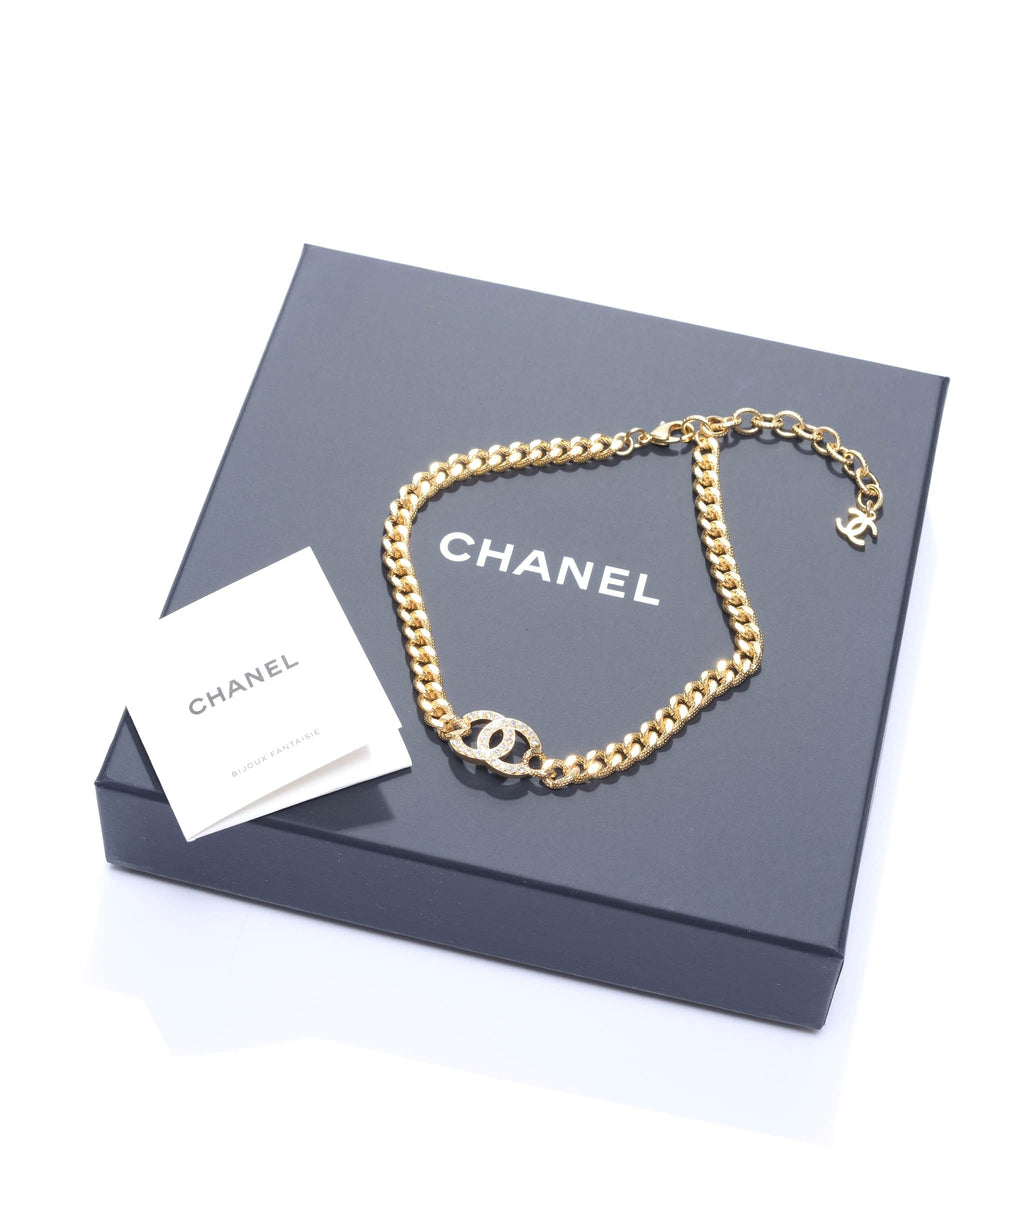 Chanel Floating Pearl Wired Choker Necklace in Silver or Gold